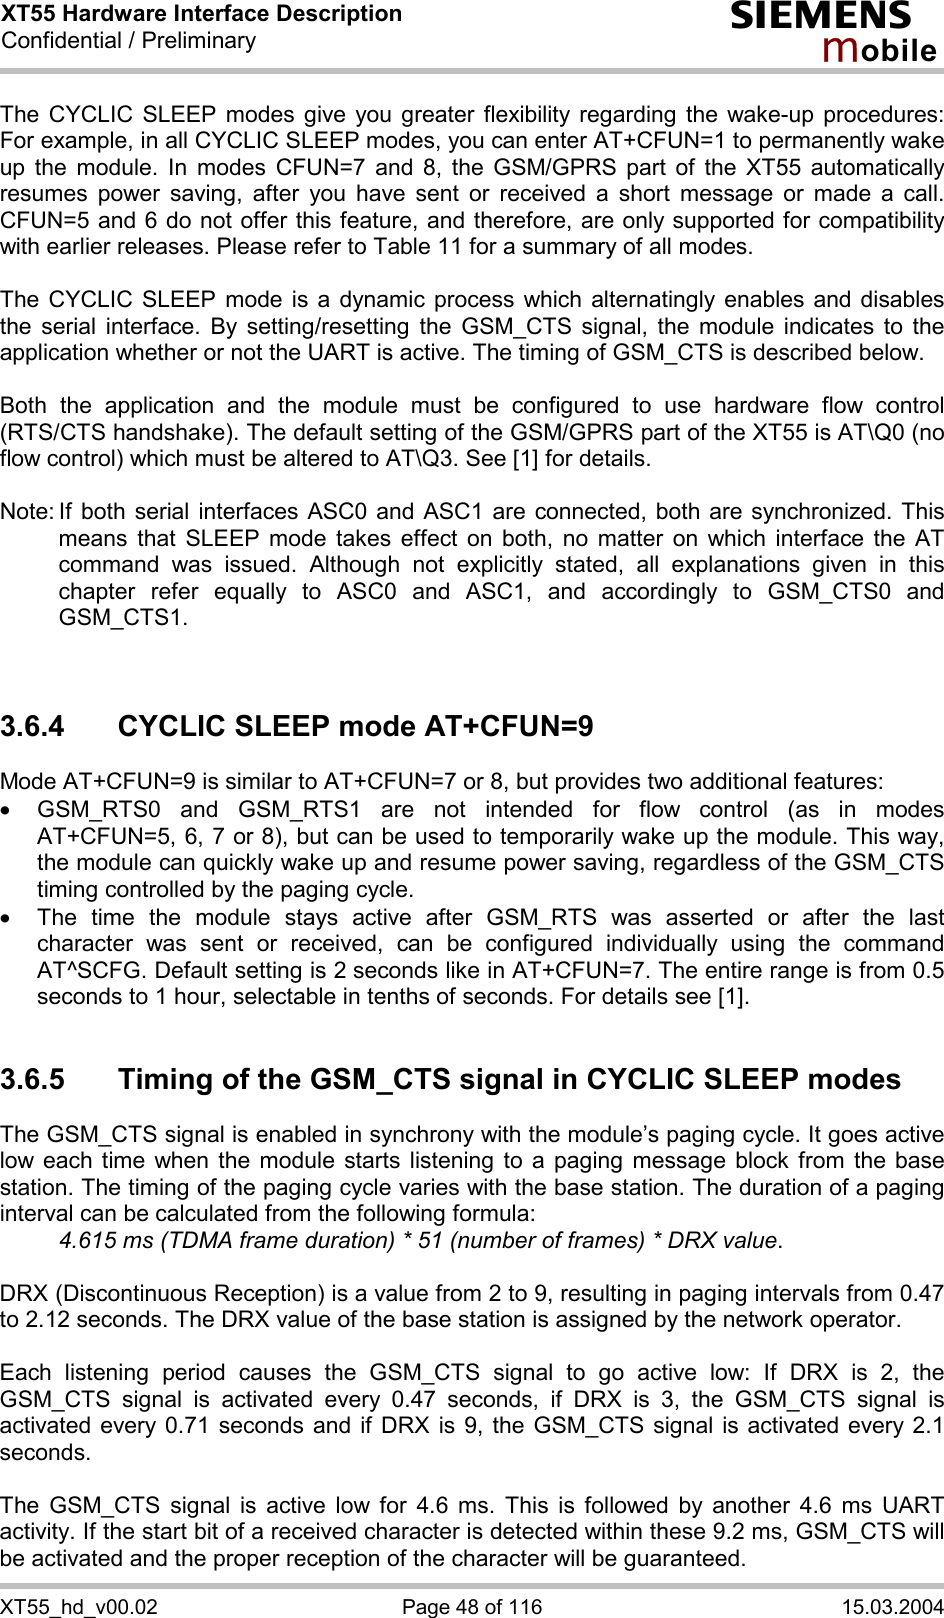 XT55 Hardware Interface Description Confidential / Preliminary s mo b i l e XT55_hd_v00.02  Page 48 of 116  15.03.2004 The CYCLIC SLEEP modes give you greater flexibility regarding the wake-up procedures: For example, in all CYCLIC SLEEP modes, you can enter AT+CFUN=1 to permanently wake up the module. In modes CFUN=7 and 8, the GSM/GPRS part of the XT55 automatically resumes power saving, after you have sent or received a short message or made a call. CFUN=5 and 6 do not offer this feature, and therefore, are only supported for compatibility with earlier releases. Please refer to Table 11 for a summary of all modes.  The CYCLIC SLEEP mode is a dynamic process which alternatingly enables and disables the serial interface. By setting/resetting the GSM_CTS signal, the module indicates to the application whether or not the UART is active. The timing of GSM_CTS is described below.   Both the application and the module must be configured to use hardware flow control (RTS/CTS handshake). The default setting of the GSM/GPRS part of the XT55 is AT\Q0 (no flow control) which must be altered to AT\Q3. See [1] for details.  Note: If both serial interfaces ASC0 and ASC1 are connected, both are synchronized. This means that SLEEP mode takes effect on both, no matter on which interface the AT command was issued. Although not explicitly stated, all explanations given in this chapter refer equally to ASC0 and ASC1, and accordingly to GSM_CTS0 and GSM_CTS1.    3.6.4  CYCLIC SLEEP mode AT+CFUN=9 Mode AT+CFUN=9 is similar to AT+CFUN=7 or 8, but provides two additional features:  ·  GSM_RTS0 and GSM_RTS1 are not intended for flow control (as in modes AT+CFUN=5, 6, 7 or 8), but can be used to temporarily wake up the module. This way, the module can quickly wake up and resume power saving, regardless of the GSM_CTS timing controlled by the paging cycle. ·  The time the module stays active after GSM_RTS was asserted or after the last character was sent or received, can be configured individually using the command AT^SCFG. Default setting is 2 seconds like in AT+CFUN=7. The entire range is from 0.5 seconds to 1 hour, selectable in tenths of seconds. For details see [1].  3.6.5  Timing of the GSM_CTS signal in CYCLIC SLEEP modes The GSM_CTS signal is enabled in synchrony with the module’s paging cycle. It goes active low each time when the module starts listening to a paging message block from the base station. The timing of the paging cycle varies with the base station. The duration of a paging interval can be calculated from the following formula:  4.615 ms (TDMA frame duration) * 51 (number of frames) * DRX value.   DRX (Discontinuous Reception) is a value from 2 to 9, resulting in paging intervals from 0.47 to 2.12 seconds. The DRX value of the base station is assigned by the network operator.   Each listening period causes the GSM_CTS signal to go active low: If DRX is 2, the GSM_CTS signal is activated every 0.47 seconds, if DRX is 3, the GSM_CTS signal is activated every 0.71 seconds and if DRX is 9, the GSM_CTS signal is activated every 2.1 seconds.  The GSM_CTS signal is active low for 4.6 ms. This is followed by another 4.6 ms UART activity. If the start bit of a received character is detected within these 9.2 ms, GSM_CTS will be activated and the proper reception of the character will be guaranteed.  